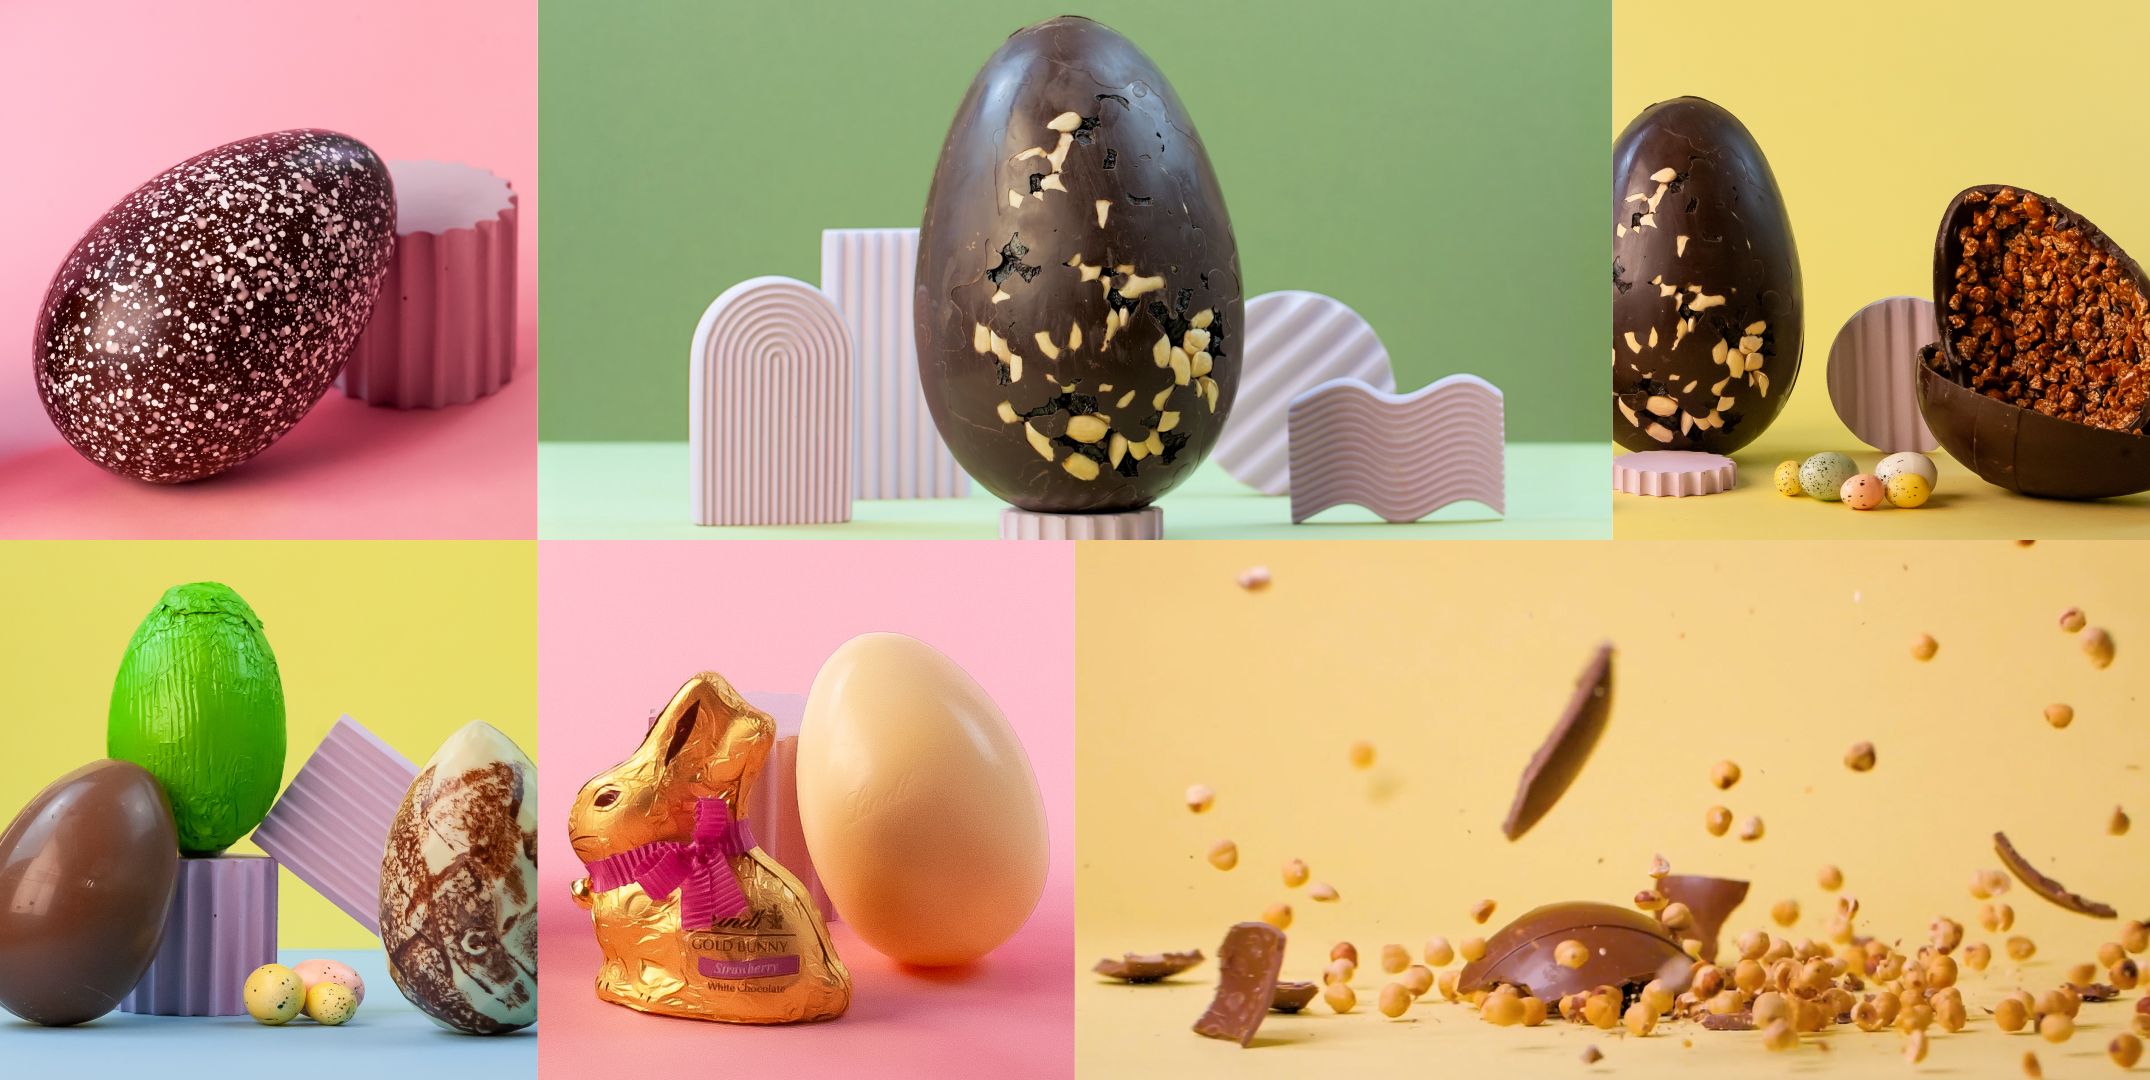 File:Smarties Egg.png - Wikimedia Commons